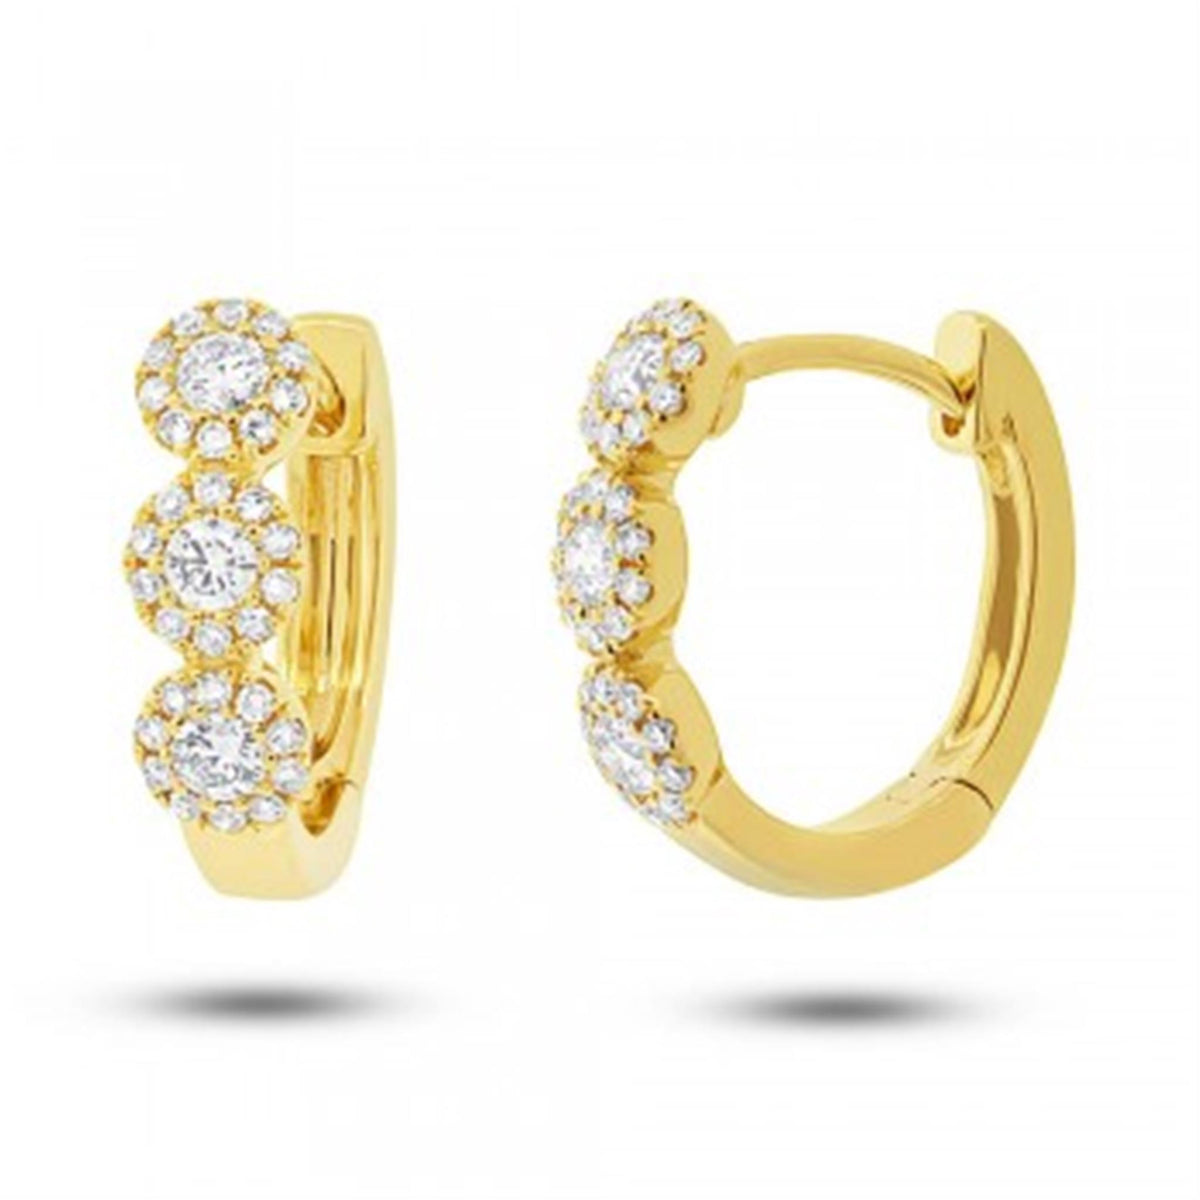 14Kt Yellow Gold Halo Hoop Earrings With .37cttw Natural Diamonds